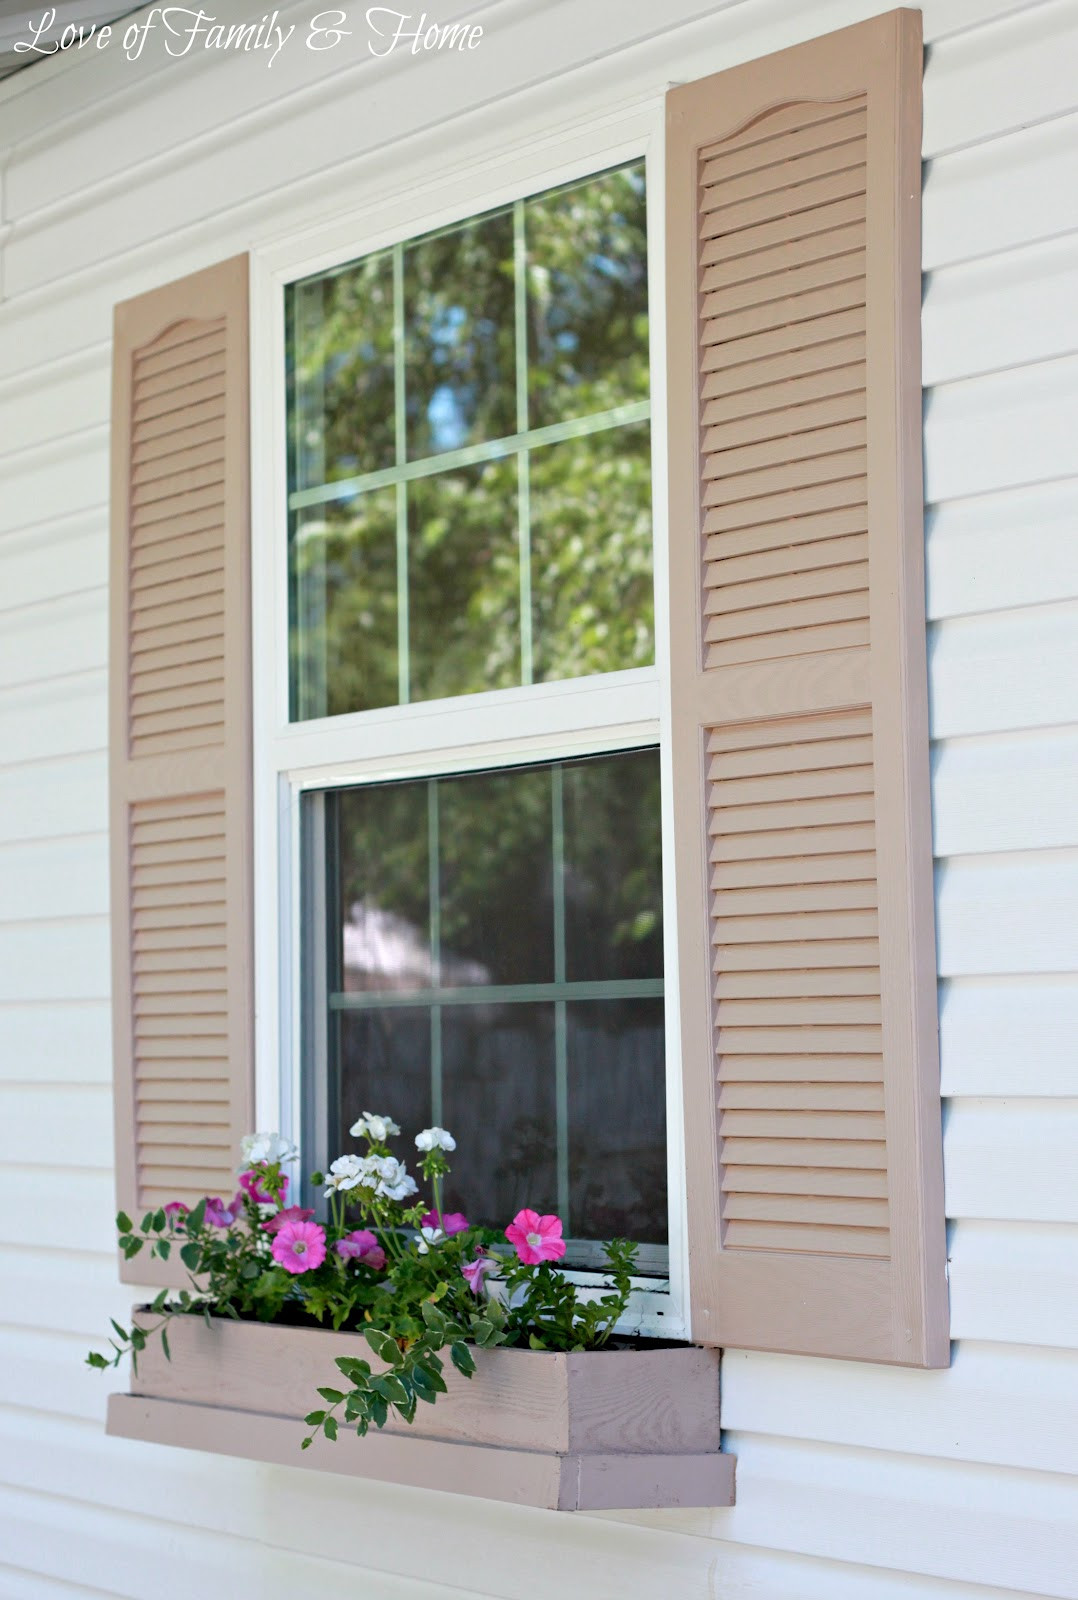 DIY Window Boxes
 Easy & Inexpensive DIY Window Boxes Love of Family & Home